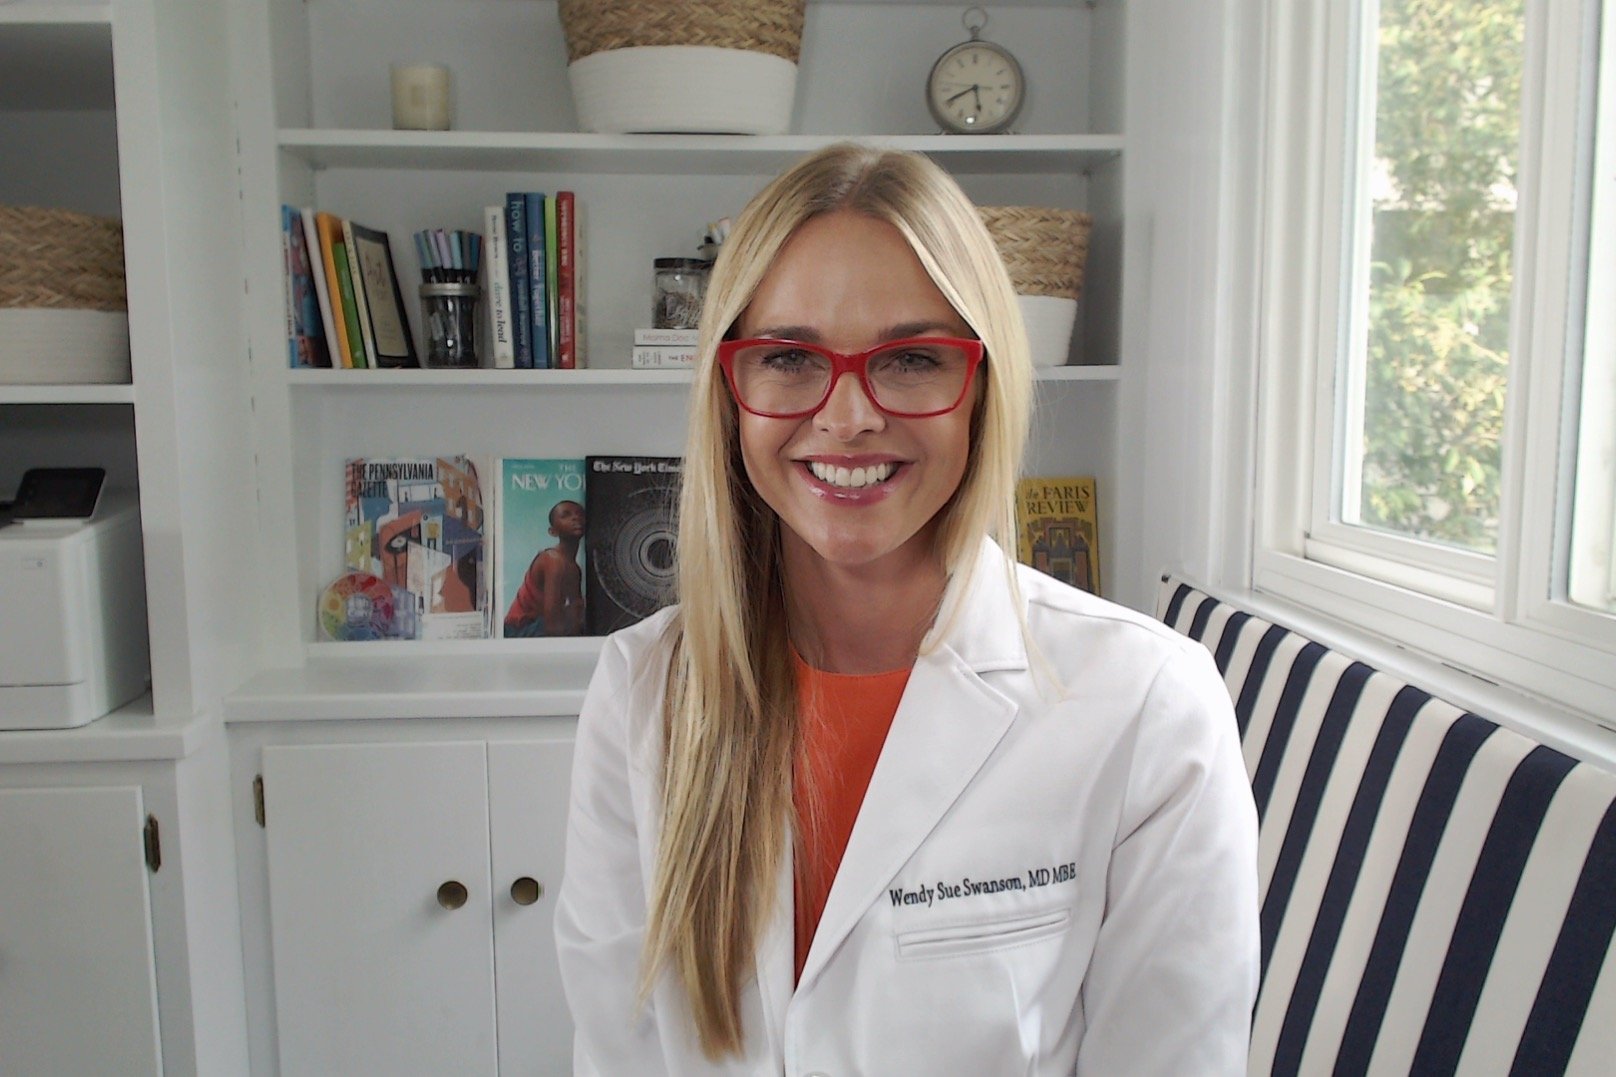 Dr. Wendy Sue Swanson, pediatrician and Chief Medical Officer at SpoonfulONE